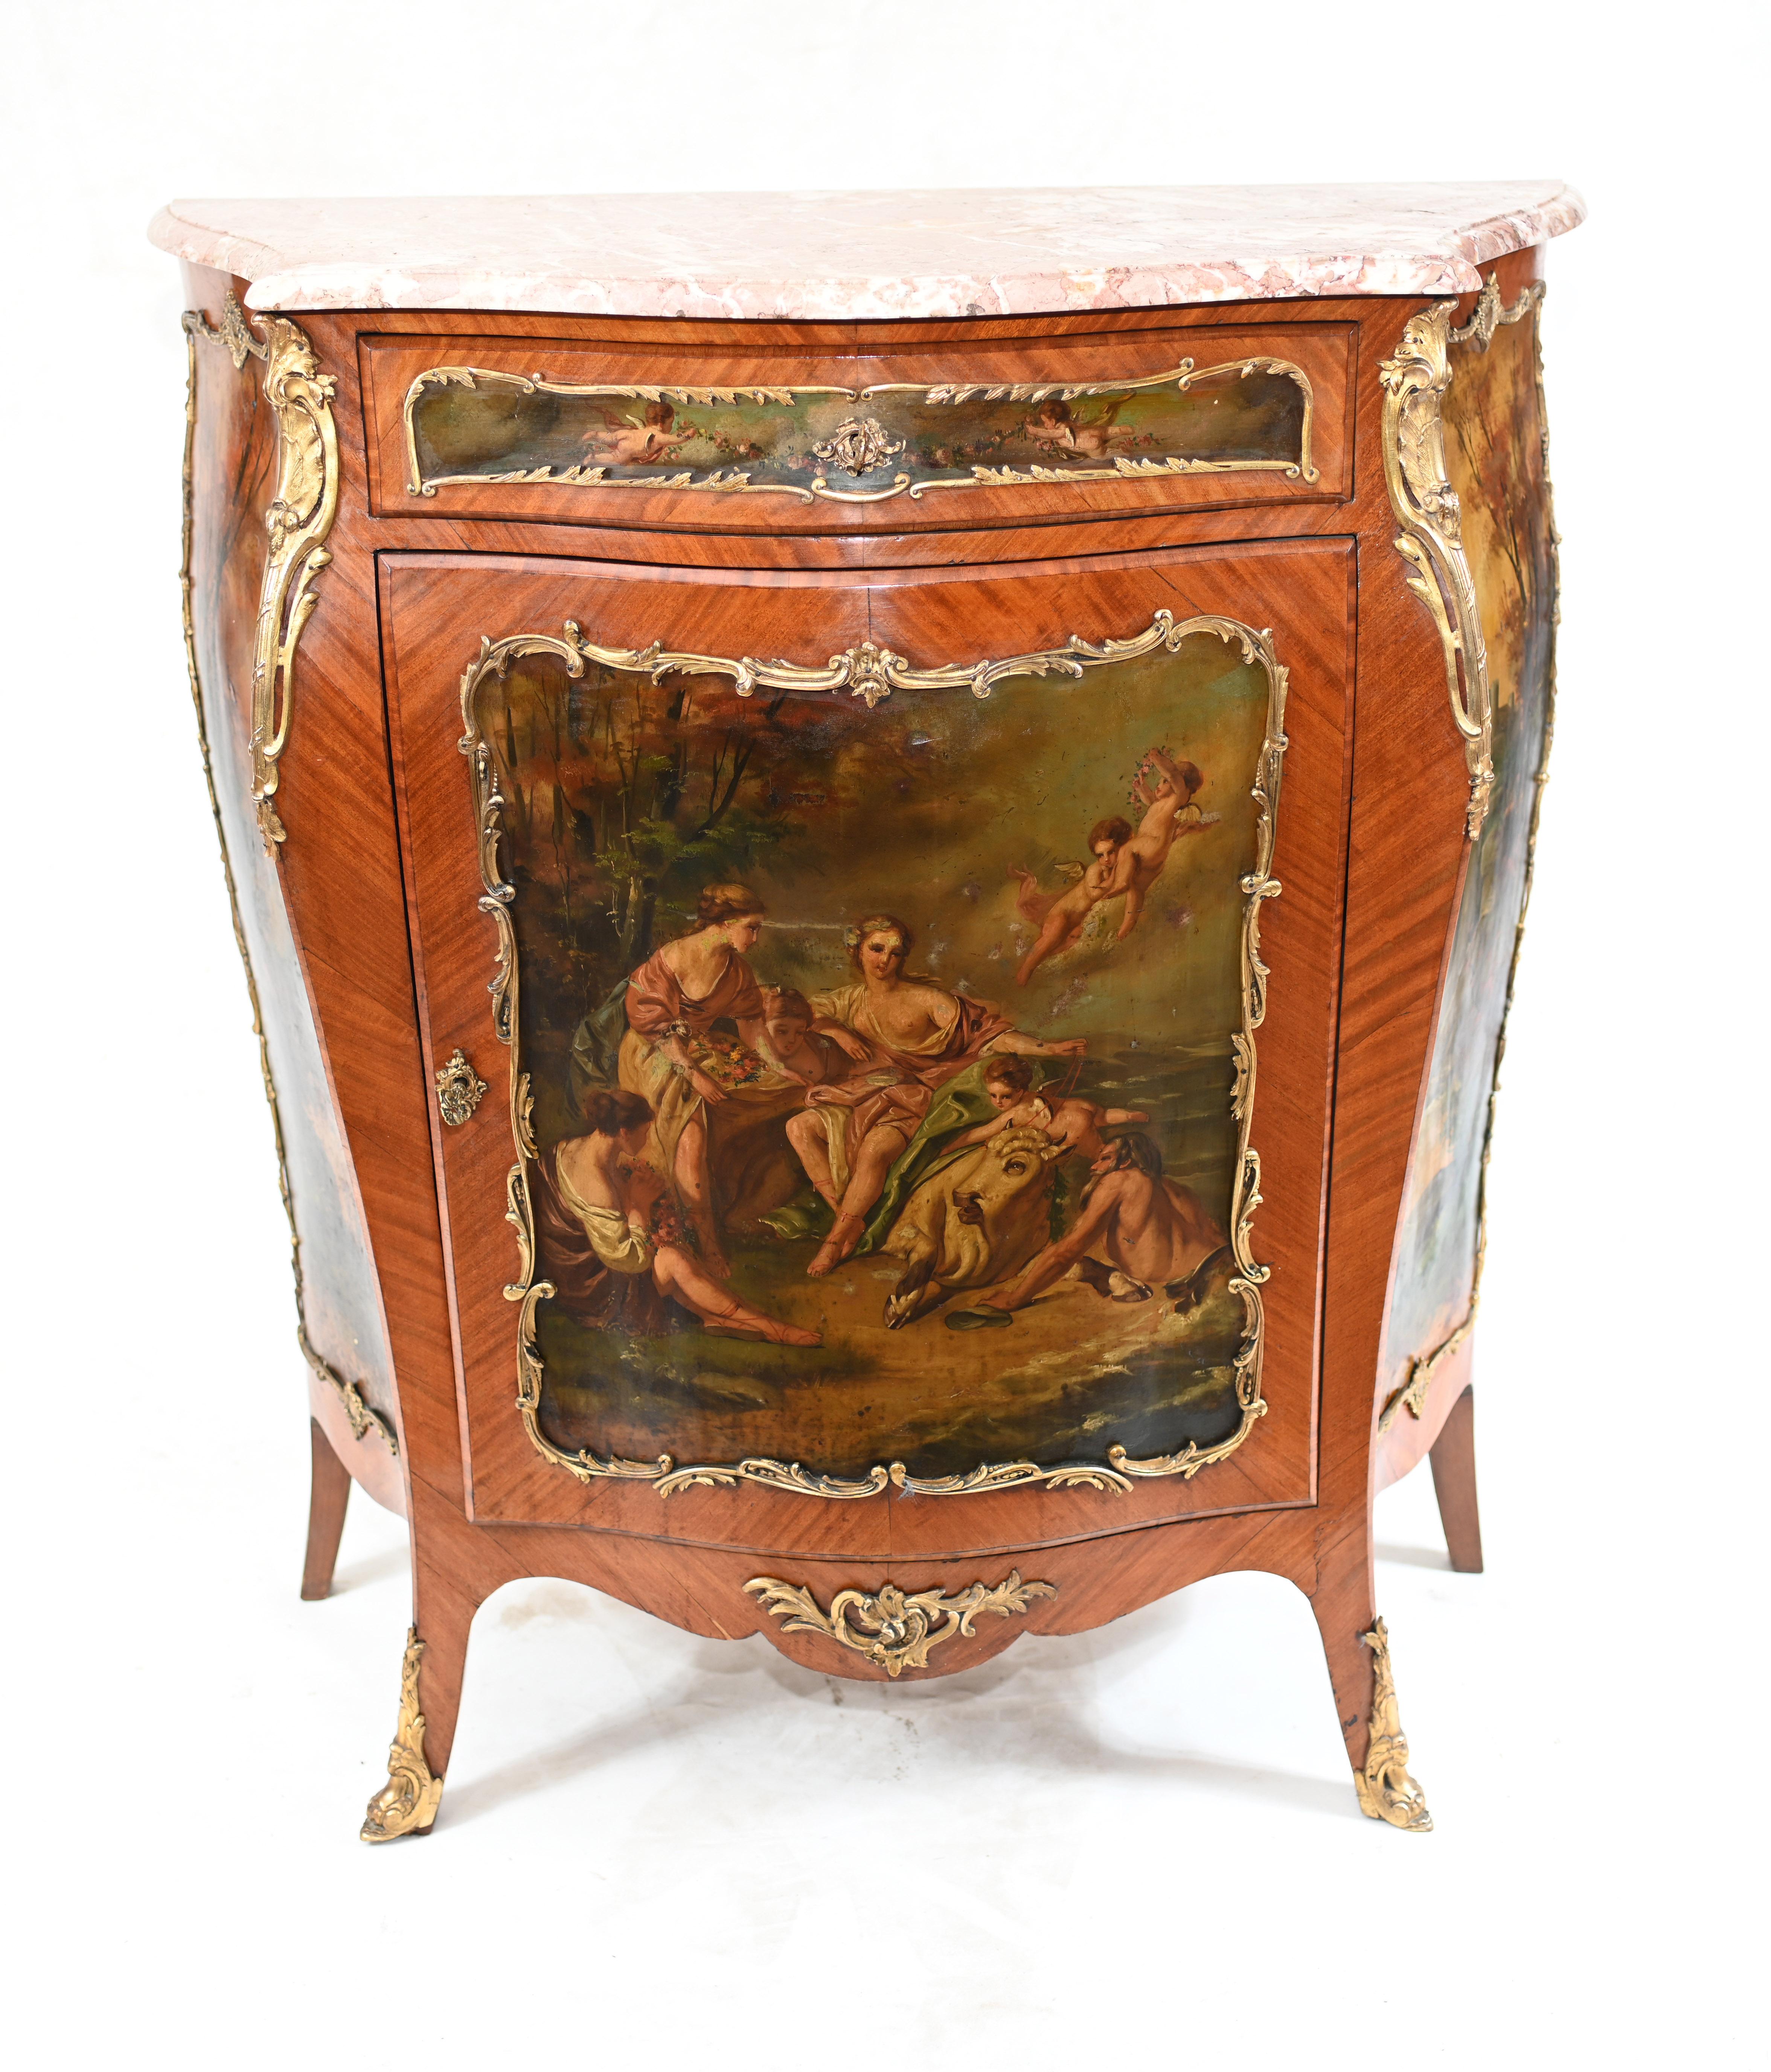 Gorgeous hand painted French side cabinet we date to circa 1890
Features intricate hand painted panels in the manner of Vernis Martin
Scenes include classical scenes with toga clad females, very detailed
Purchased on the Roue de Rossiers at the